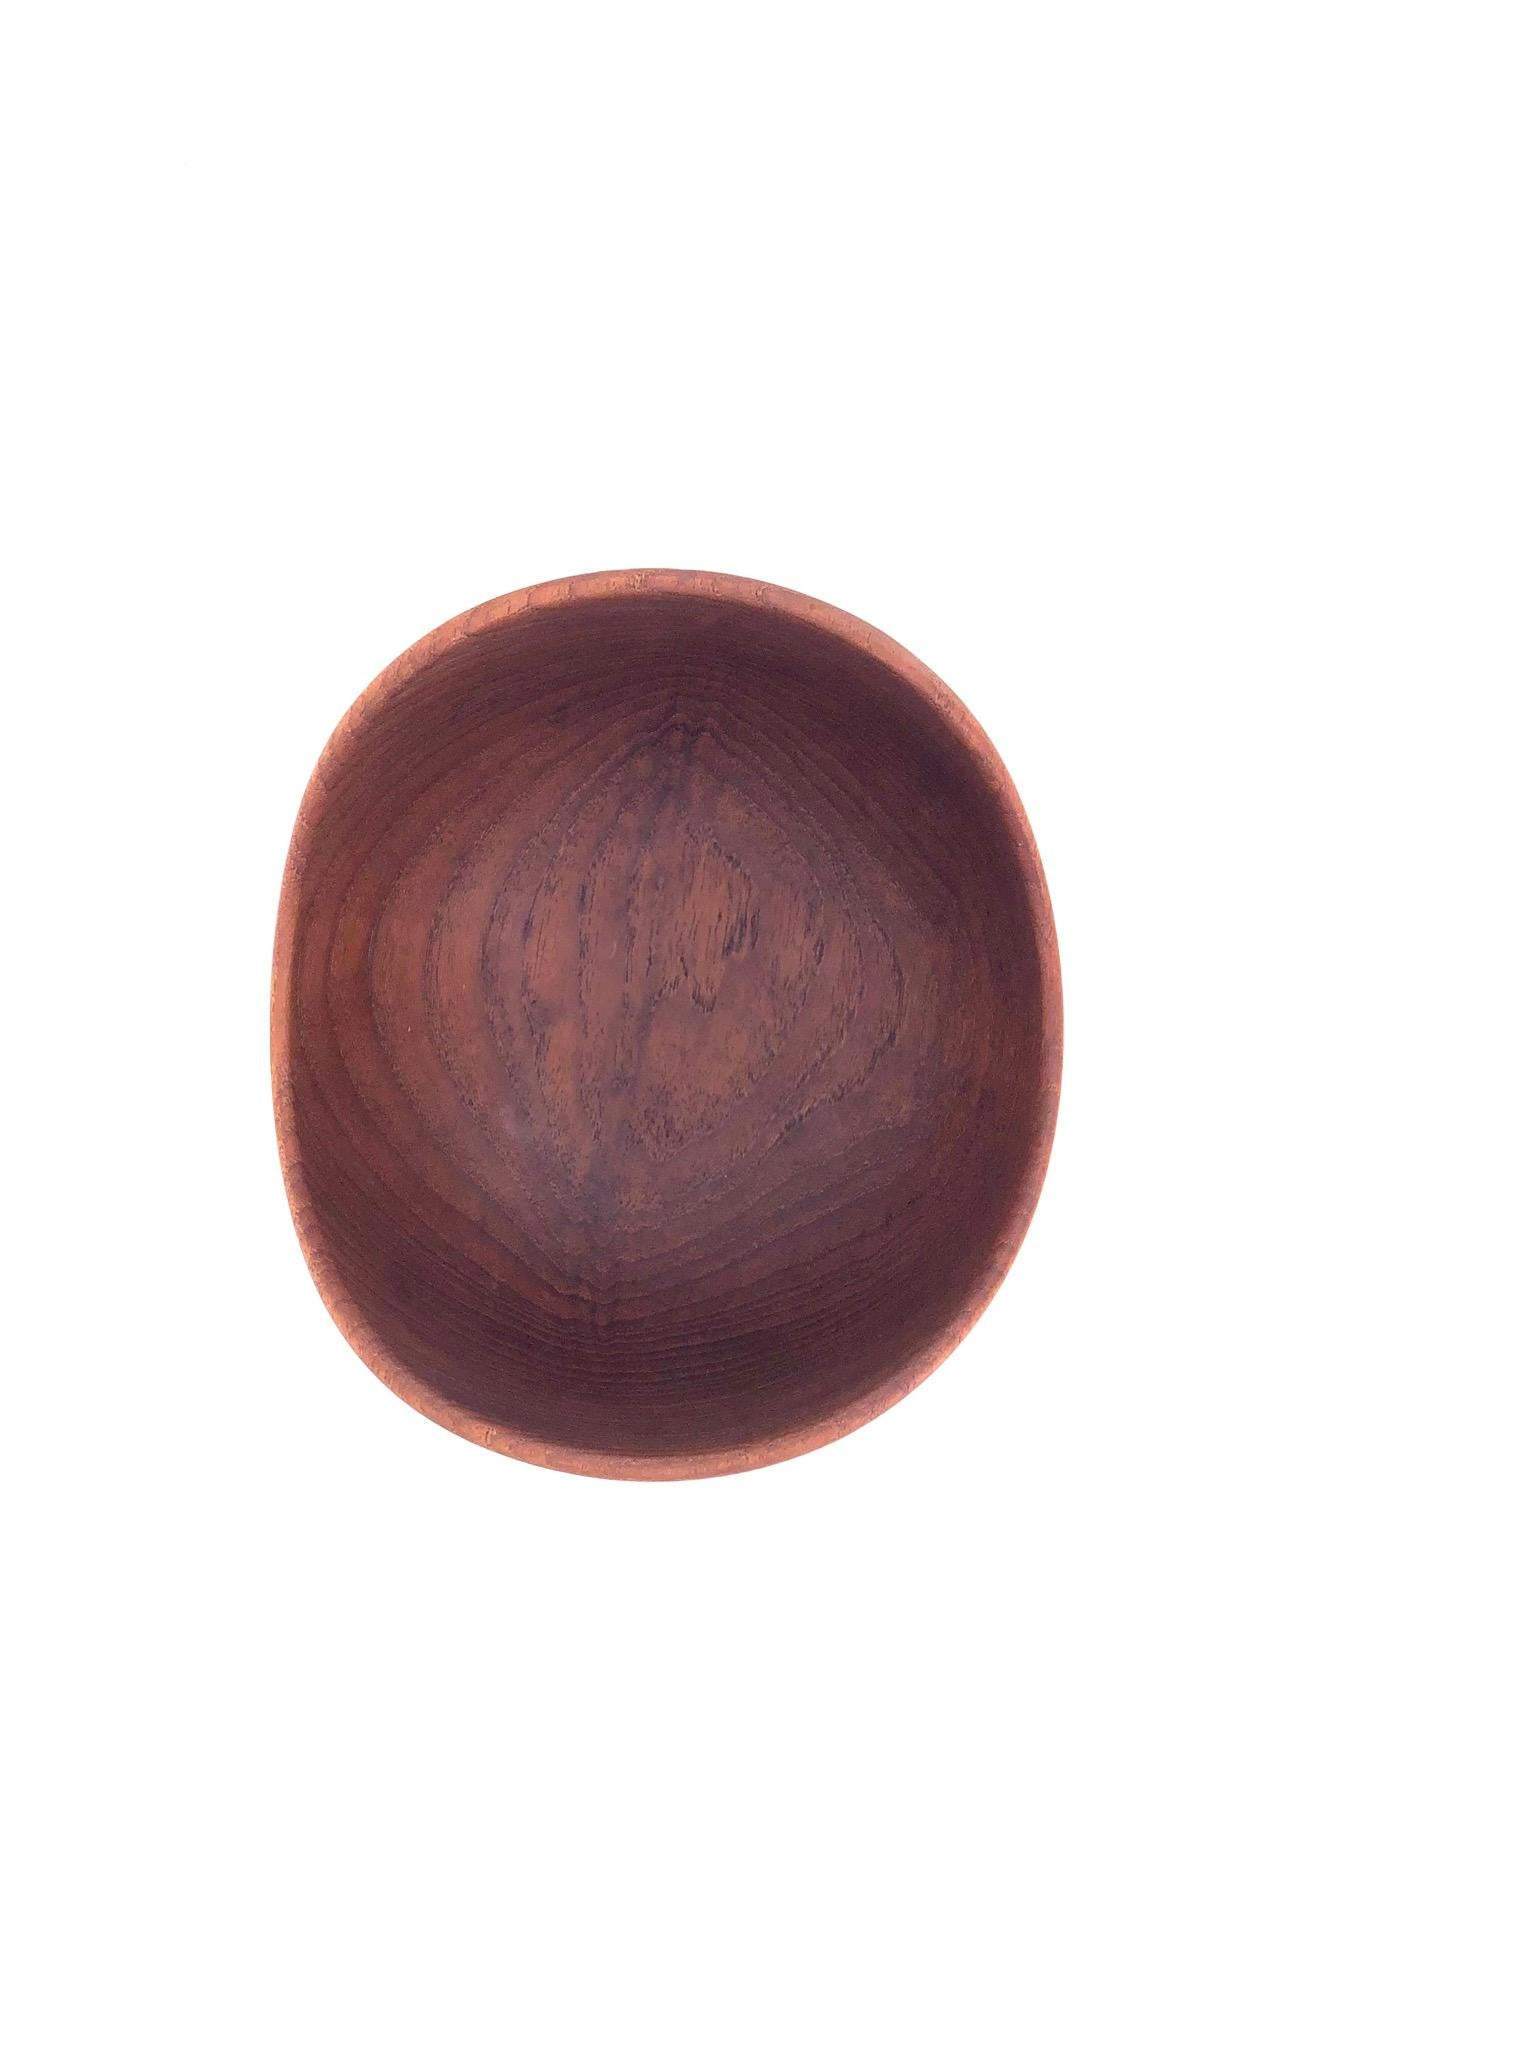 Danish Modern Solid Teak Hand Turned Bowl by Kesa Denmark In Excellent Condition For Sale In San Diego, CA